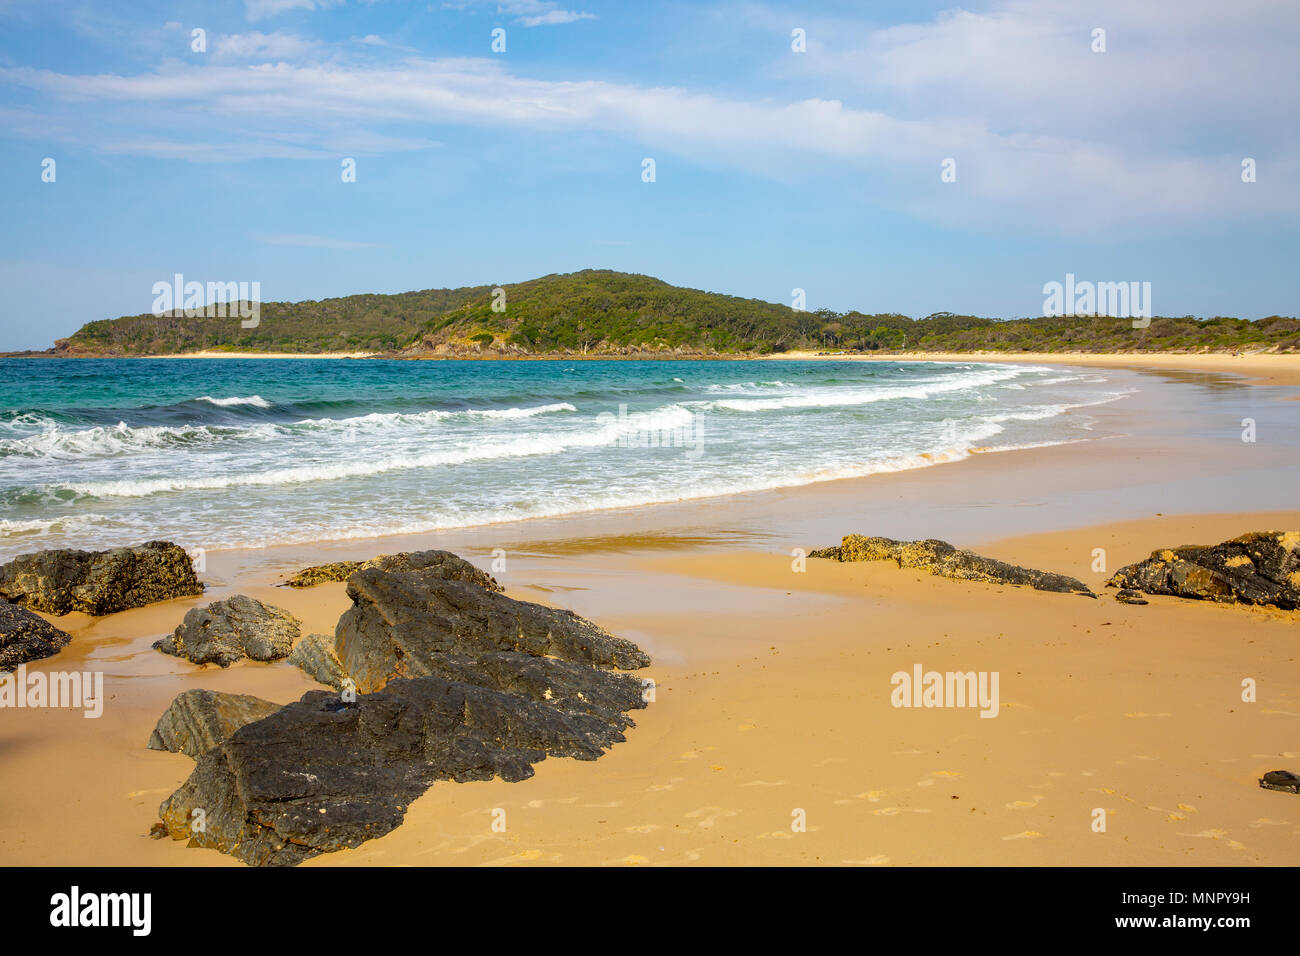 Elizabeth beach near Forster in the Great lakes region of New South Wales, Australia Stock Photo